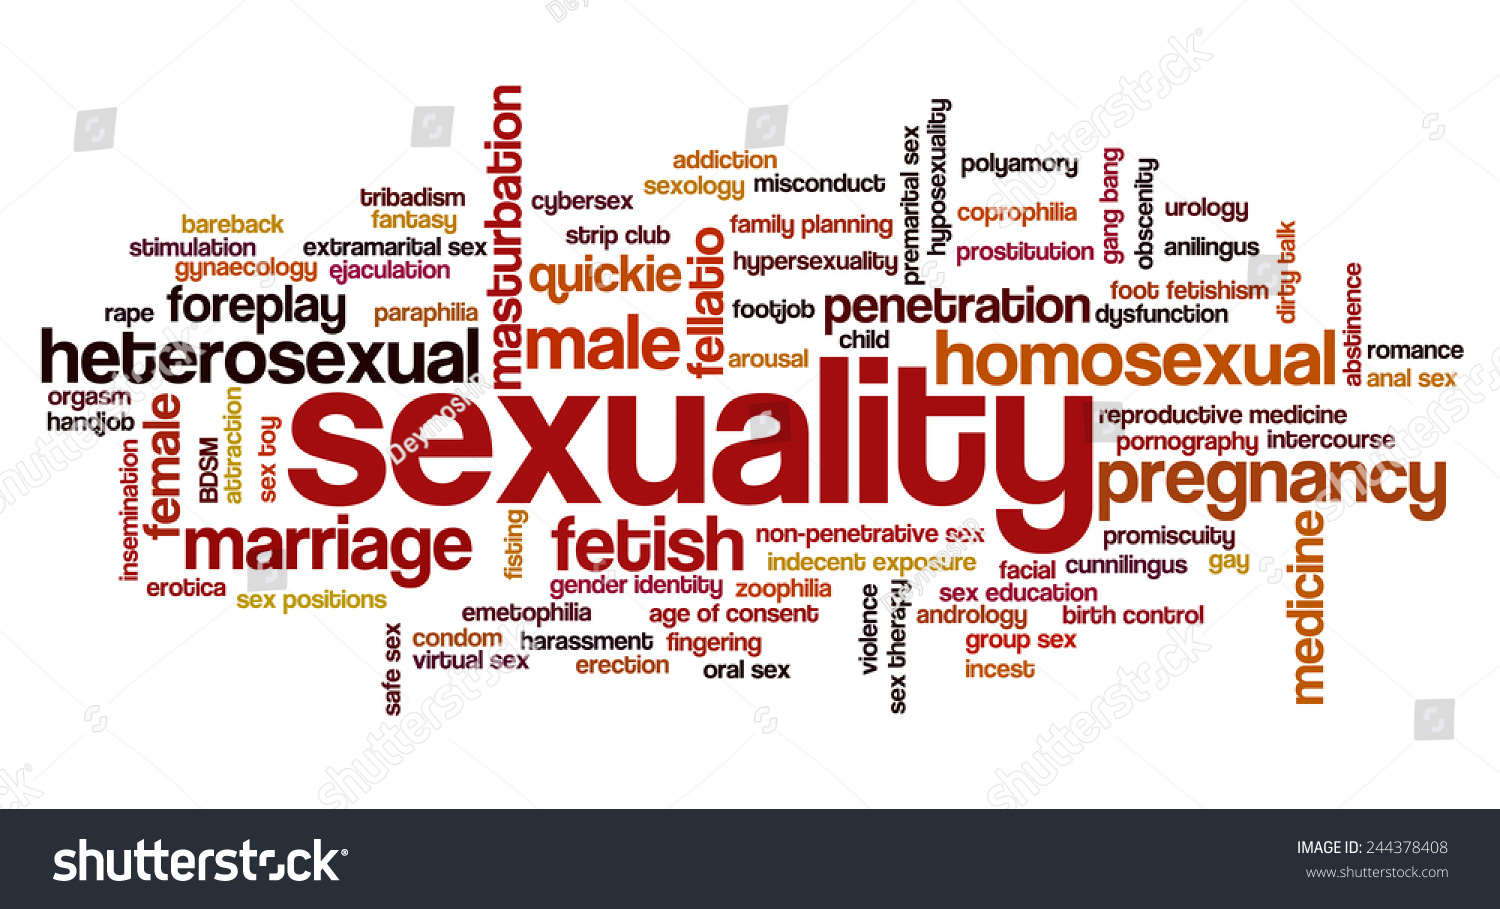 Word Cloud Illustrating Words Related To Human Sexuality Stock Vector 